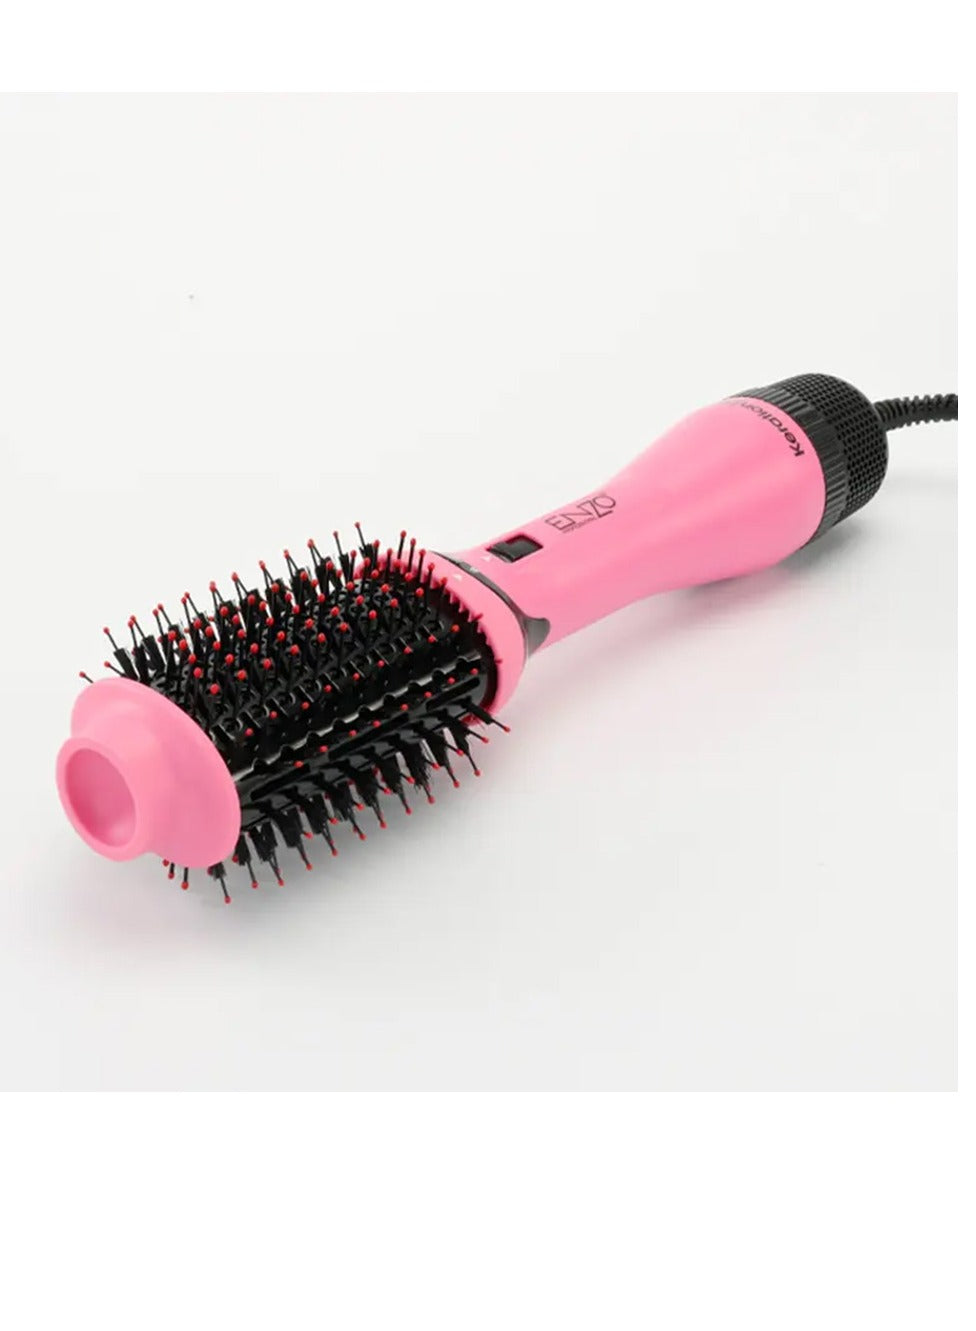 ENZO Professional Ionic High Speed Hair Dryer Hot Air Brush Auto Air Wrap Curler Blow Dryer Comb Ionic 2 in 1 Hair Styler Curler EN-6208